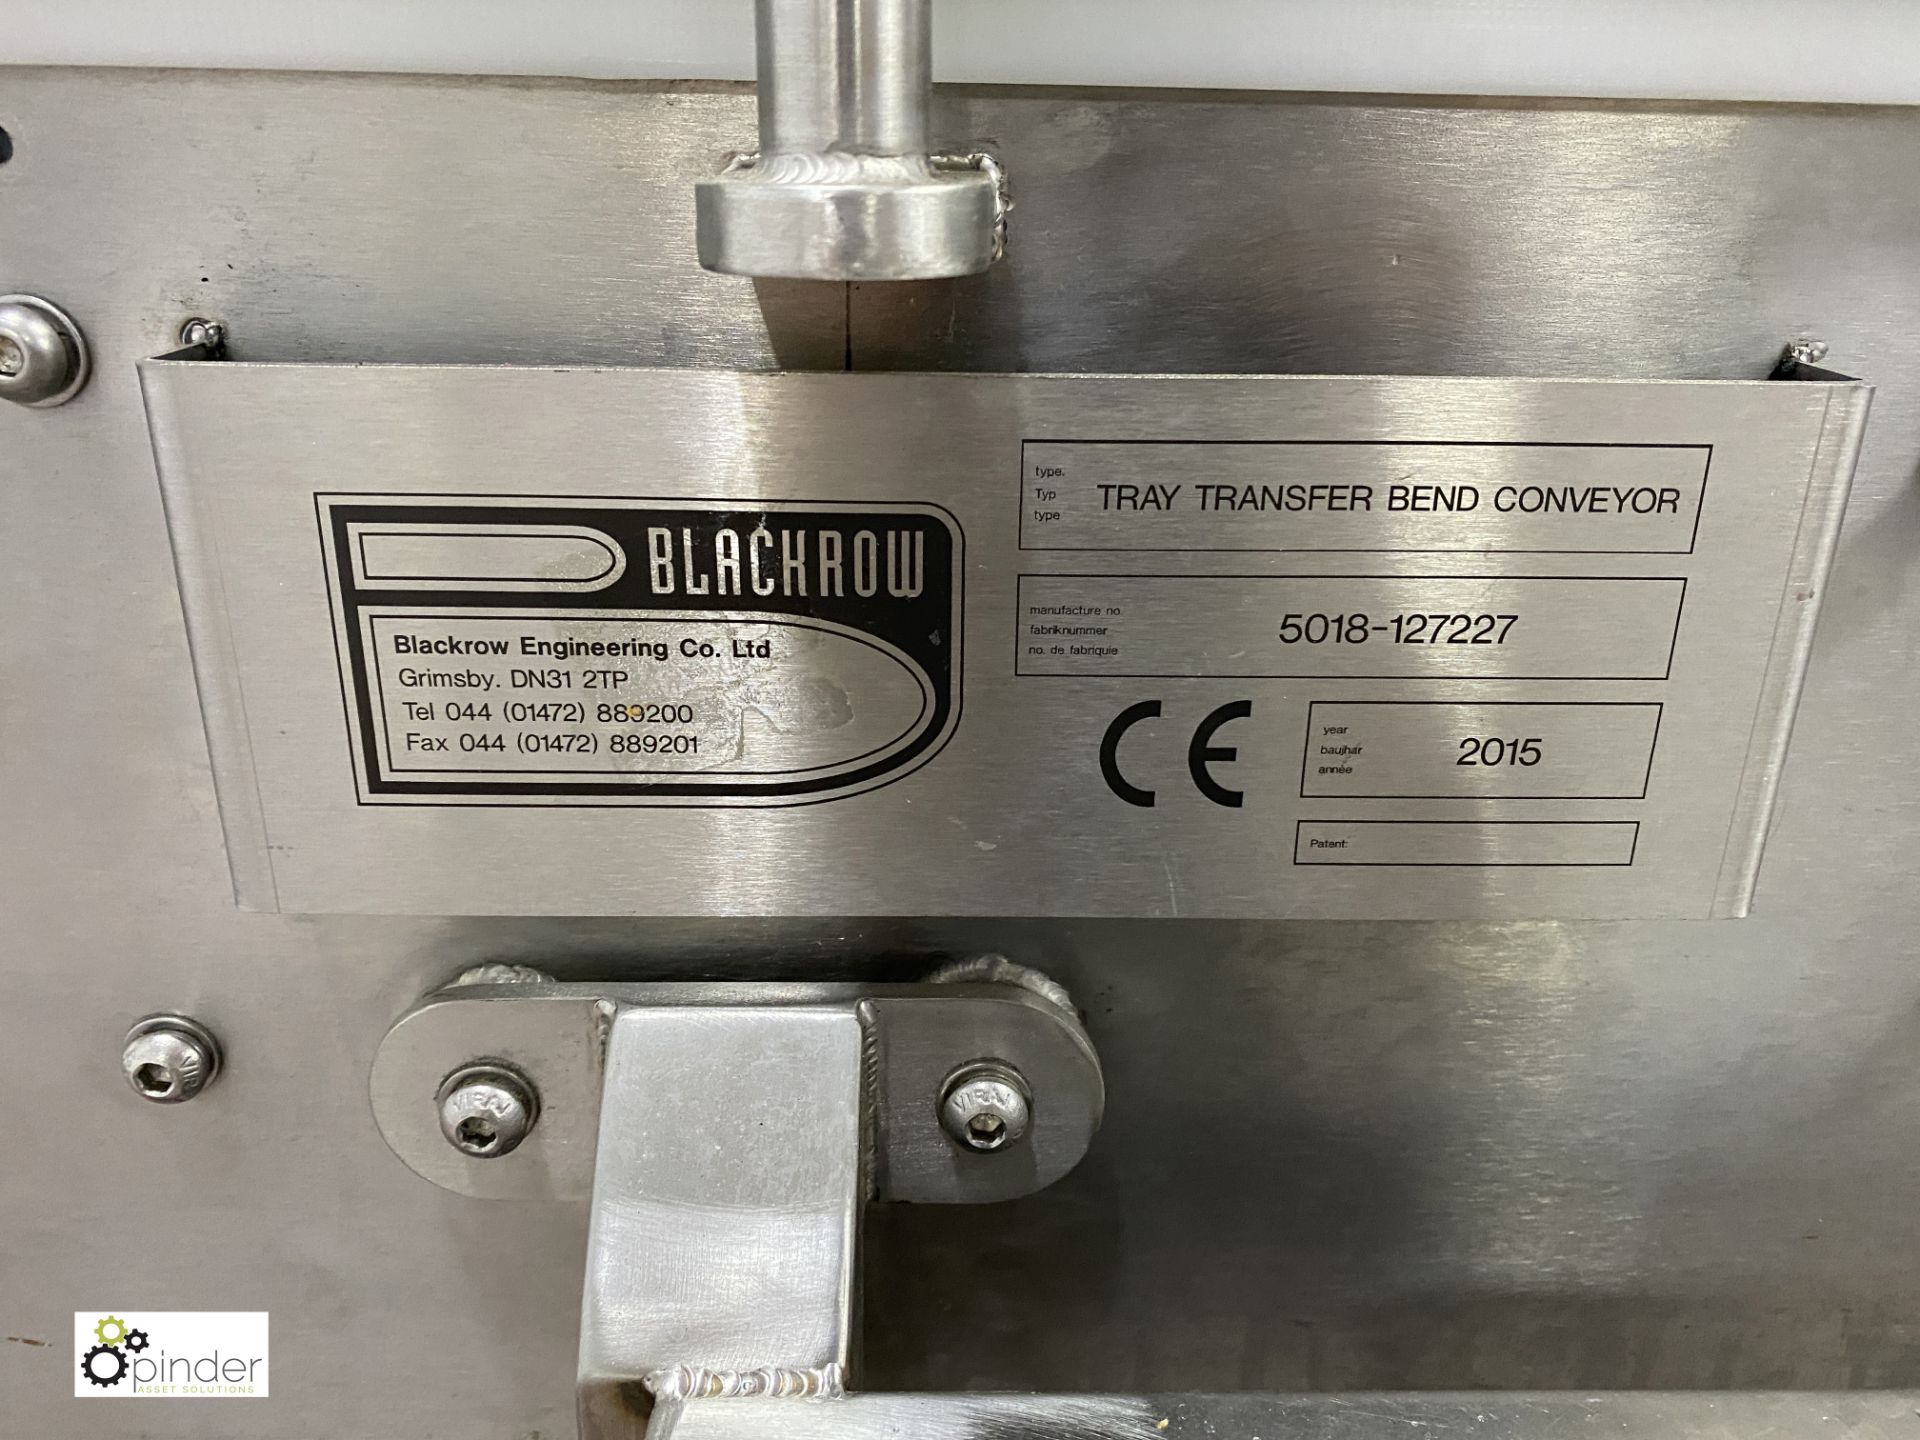 Blackrow Tray Transfer Bend Conveyor, year 2015, serial number 5018127227, belt size 840mm x - Image 7 of 8